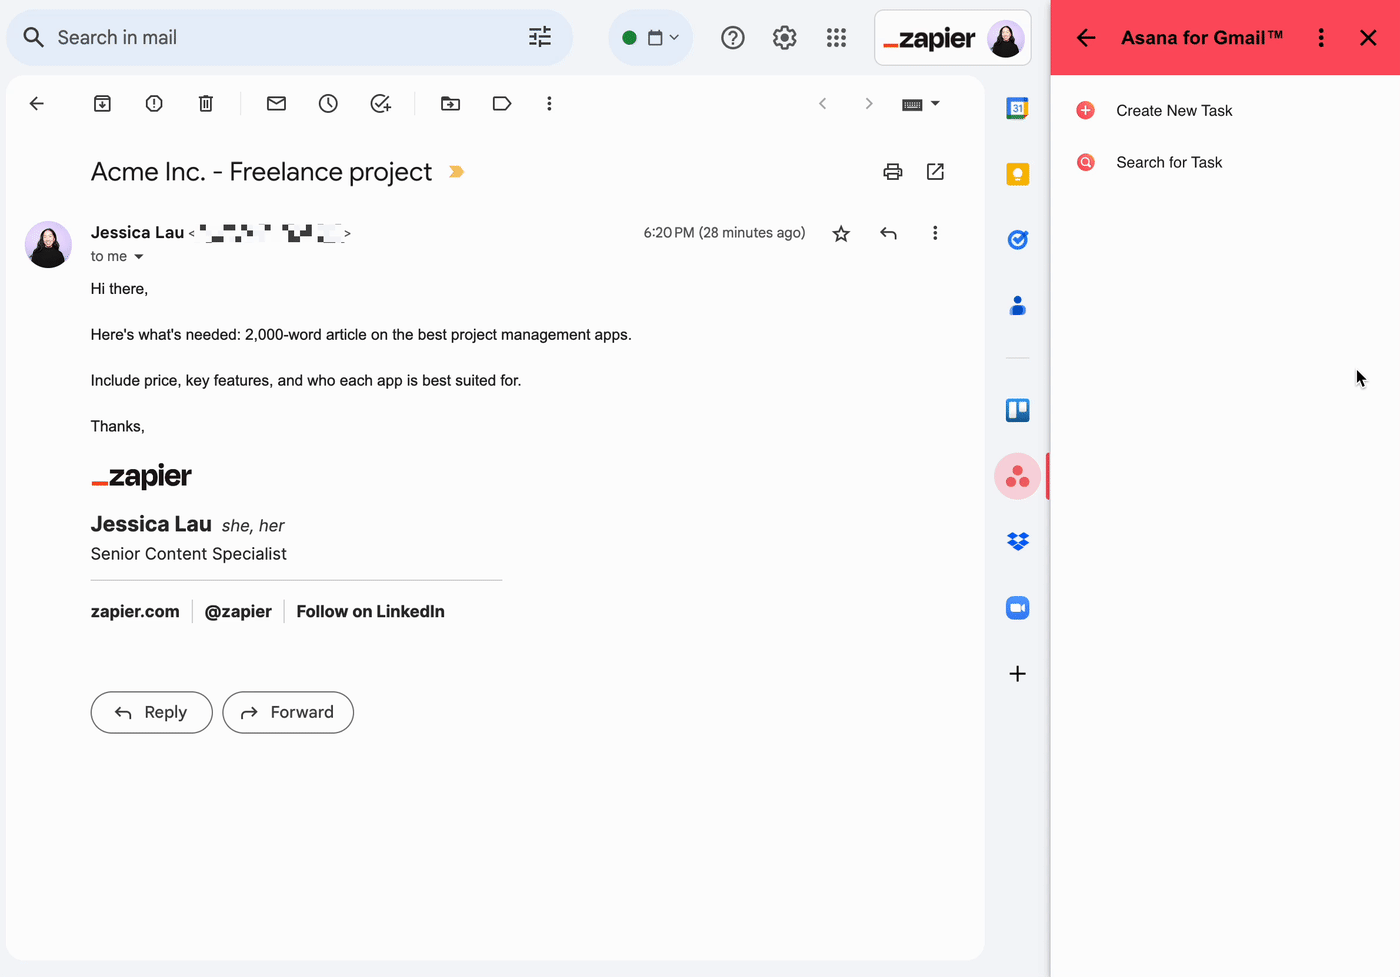 Open email in Gmail. In the adjacent Asana side panel, the cursor clicks "Create New Task," and the contents of the email are populated as a task, which is then added to Asana. 